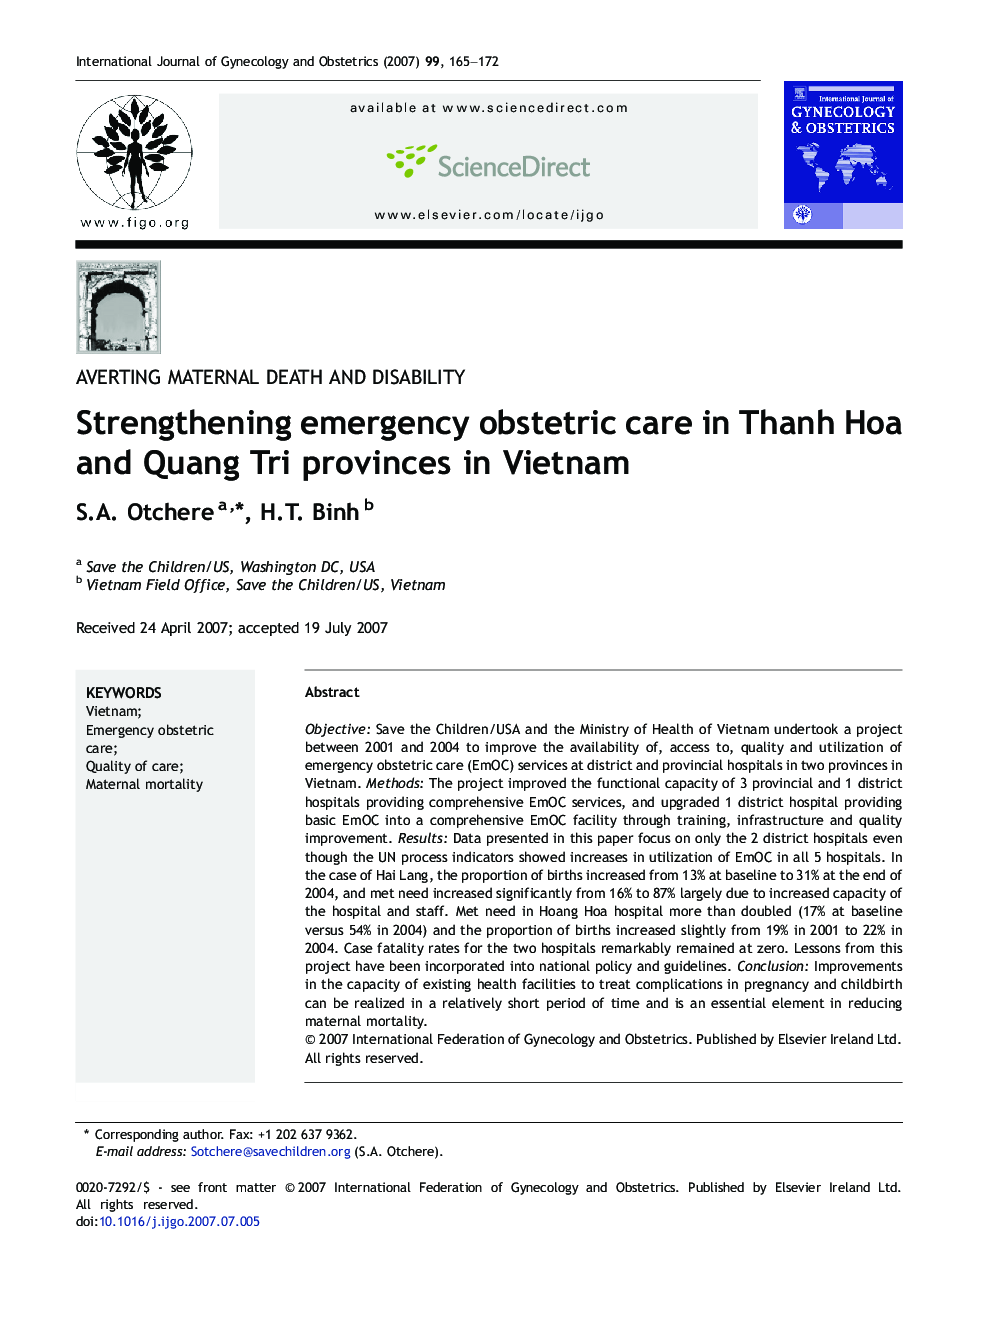 Strengthening emergency obstetric care in Thanh Hoa and Quang Tri provinces in Vietnam